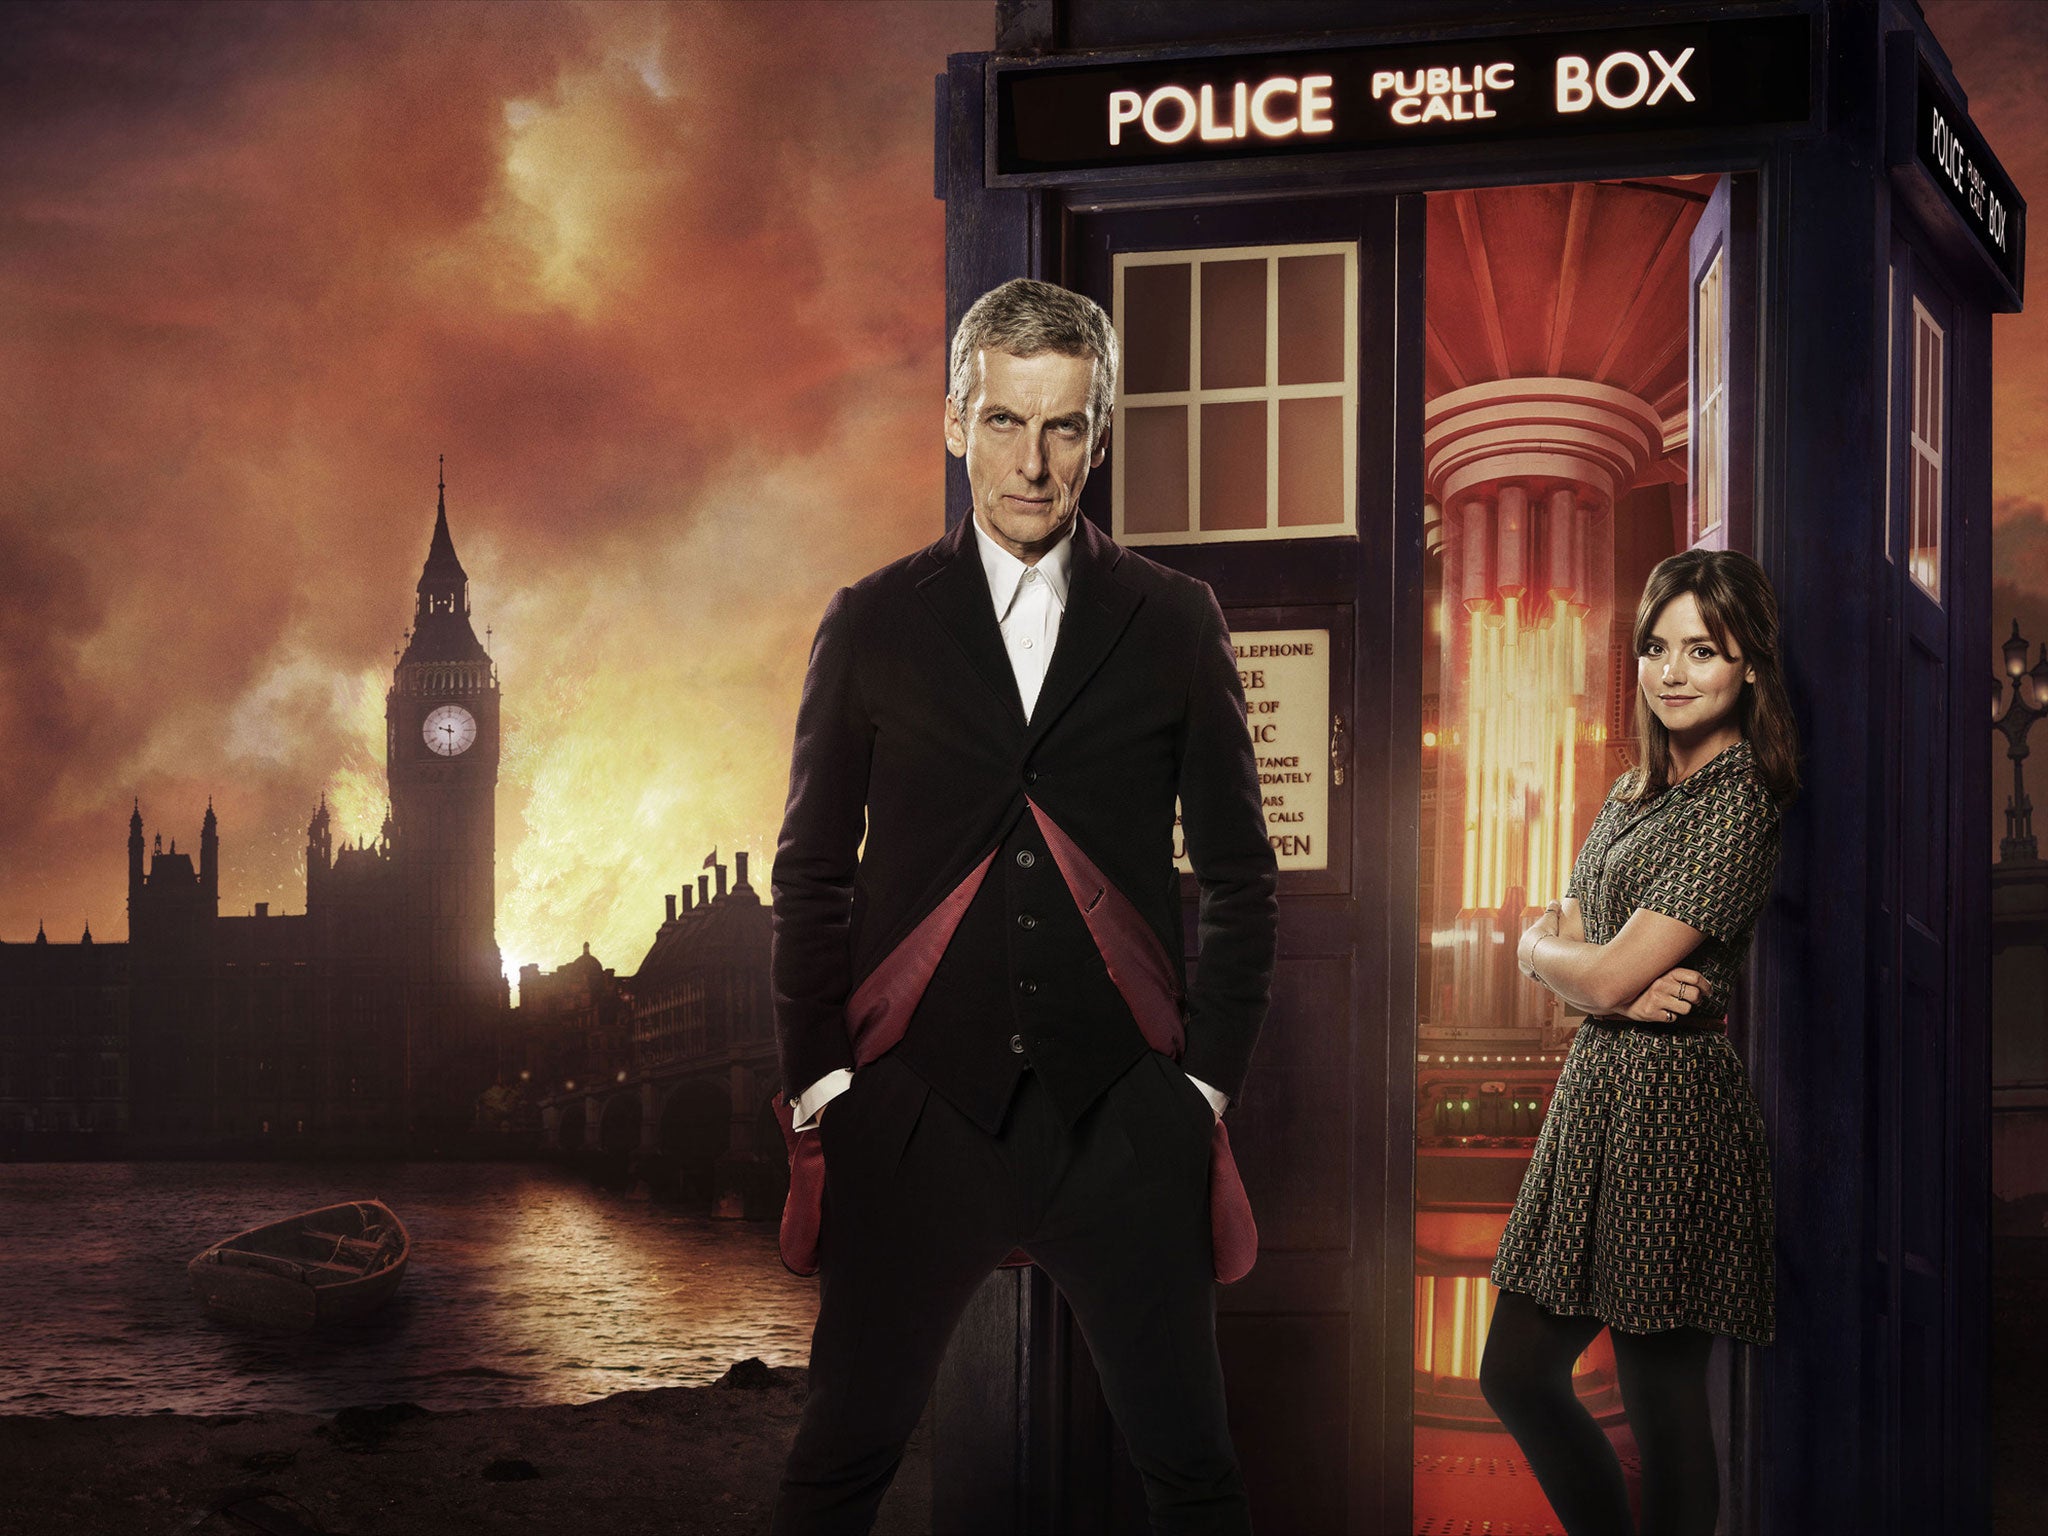 Clara and the twelfth Time Lord embark on their first Doctor Who adventure